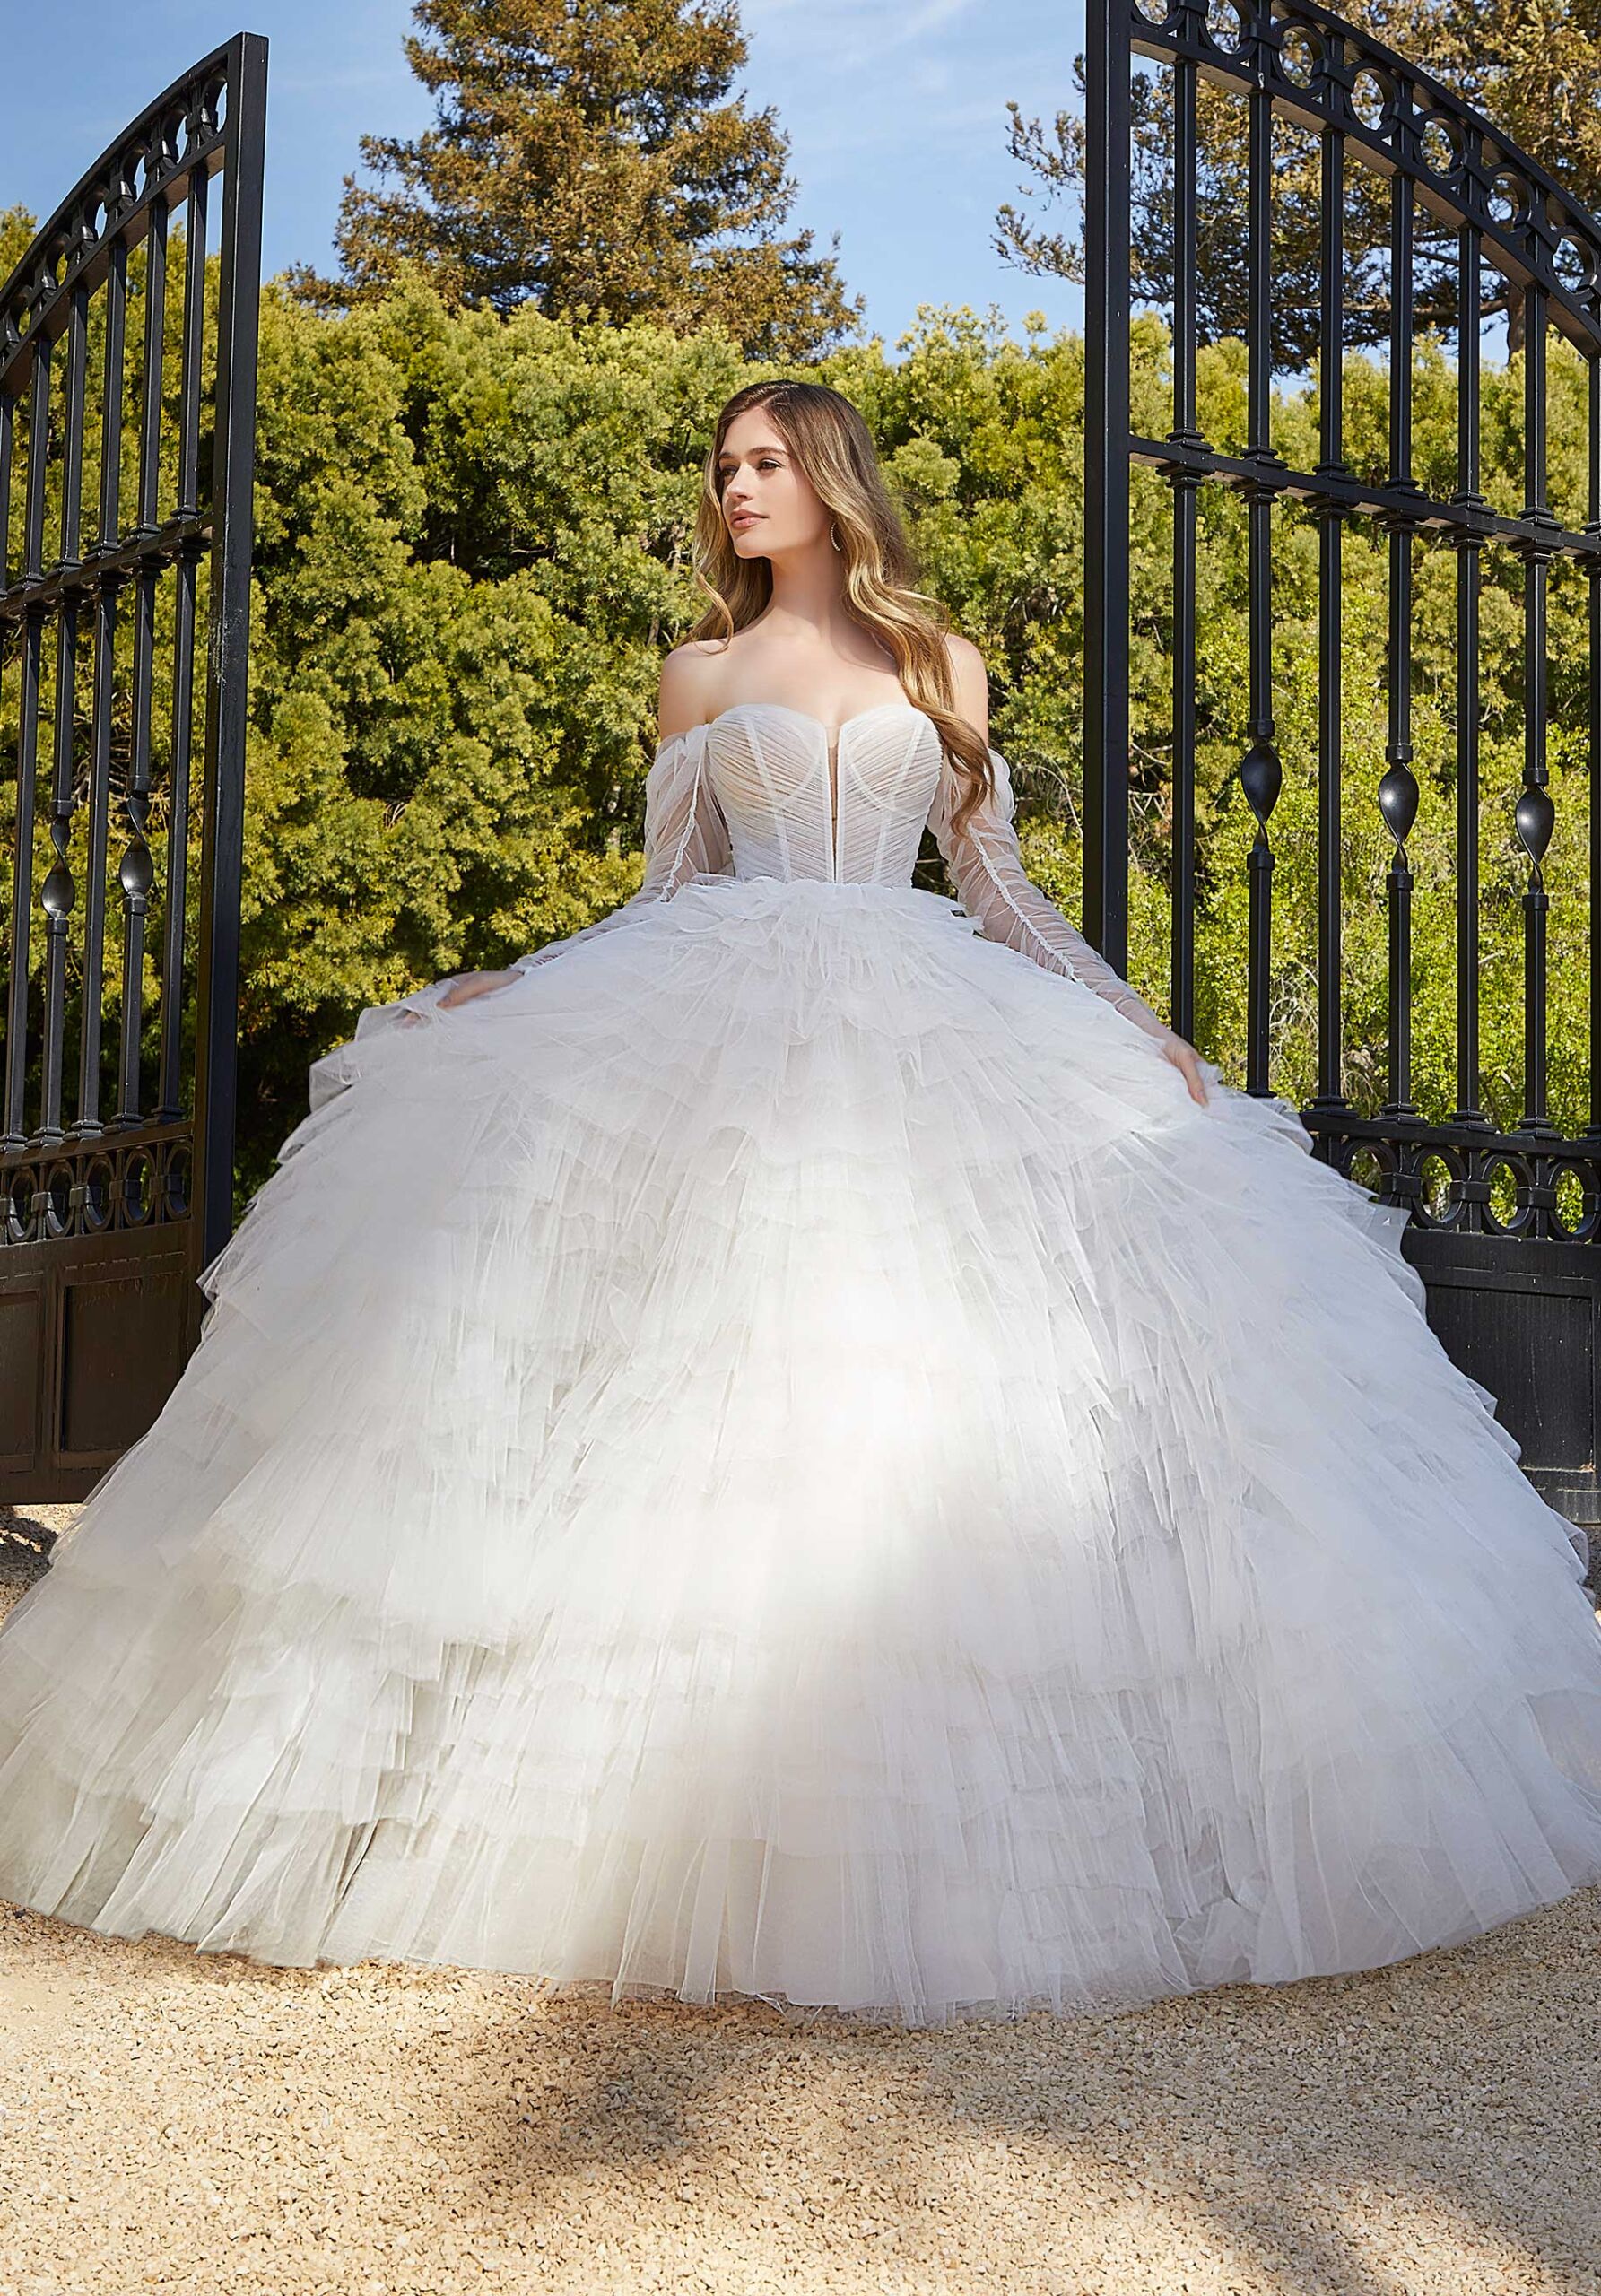 Illusion Tulle Wedding Robe With Sheer Details And Tiered Ruffles